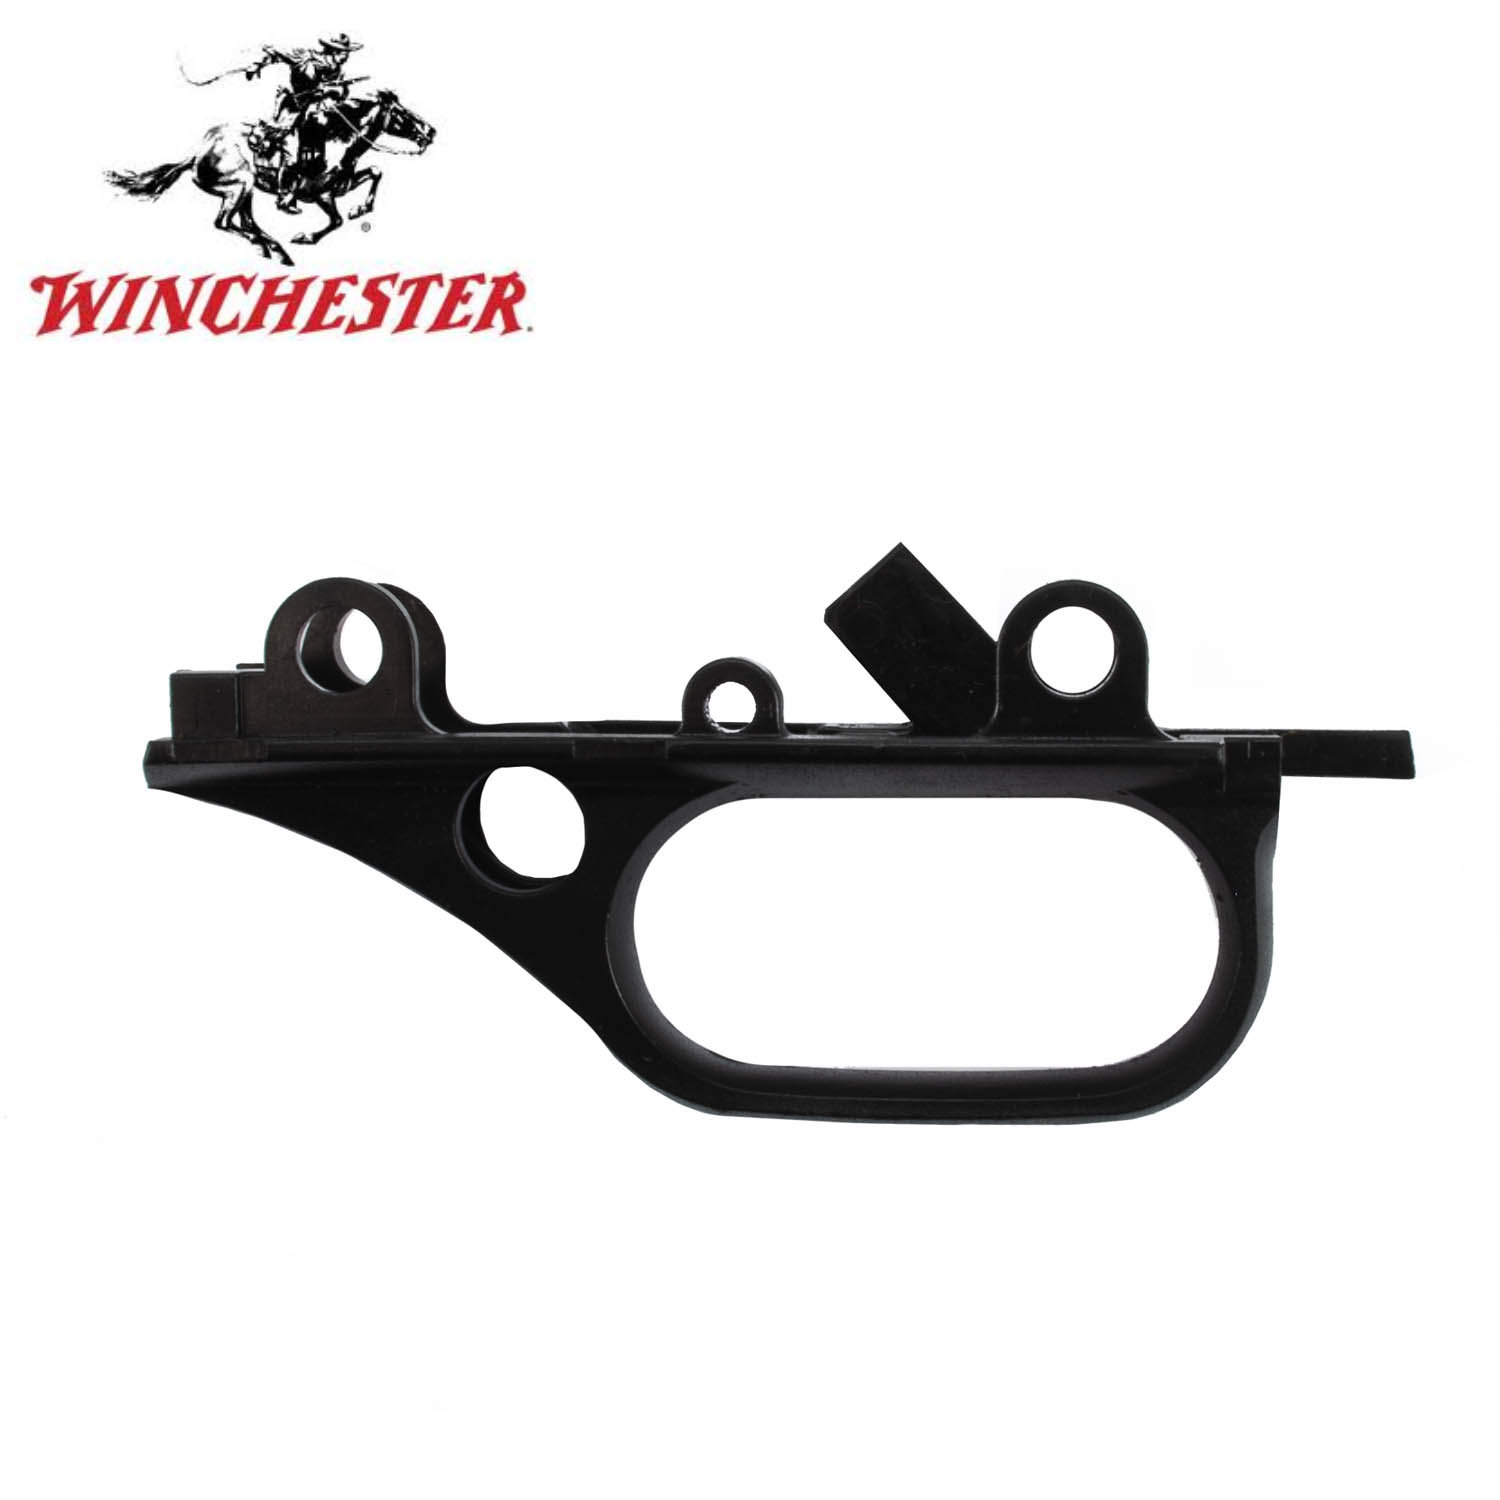 This OEM factory original trigger guard is manufactured for the Winchester ...